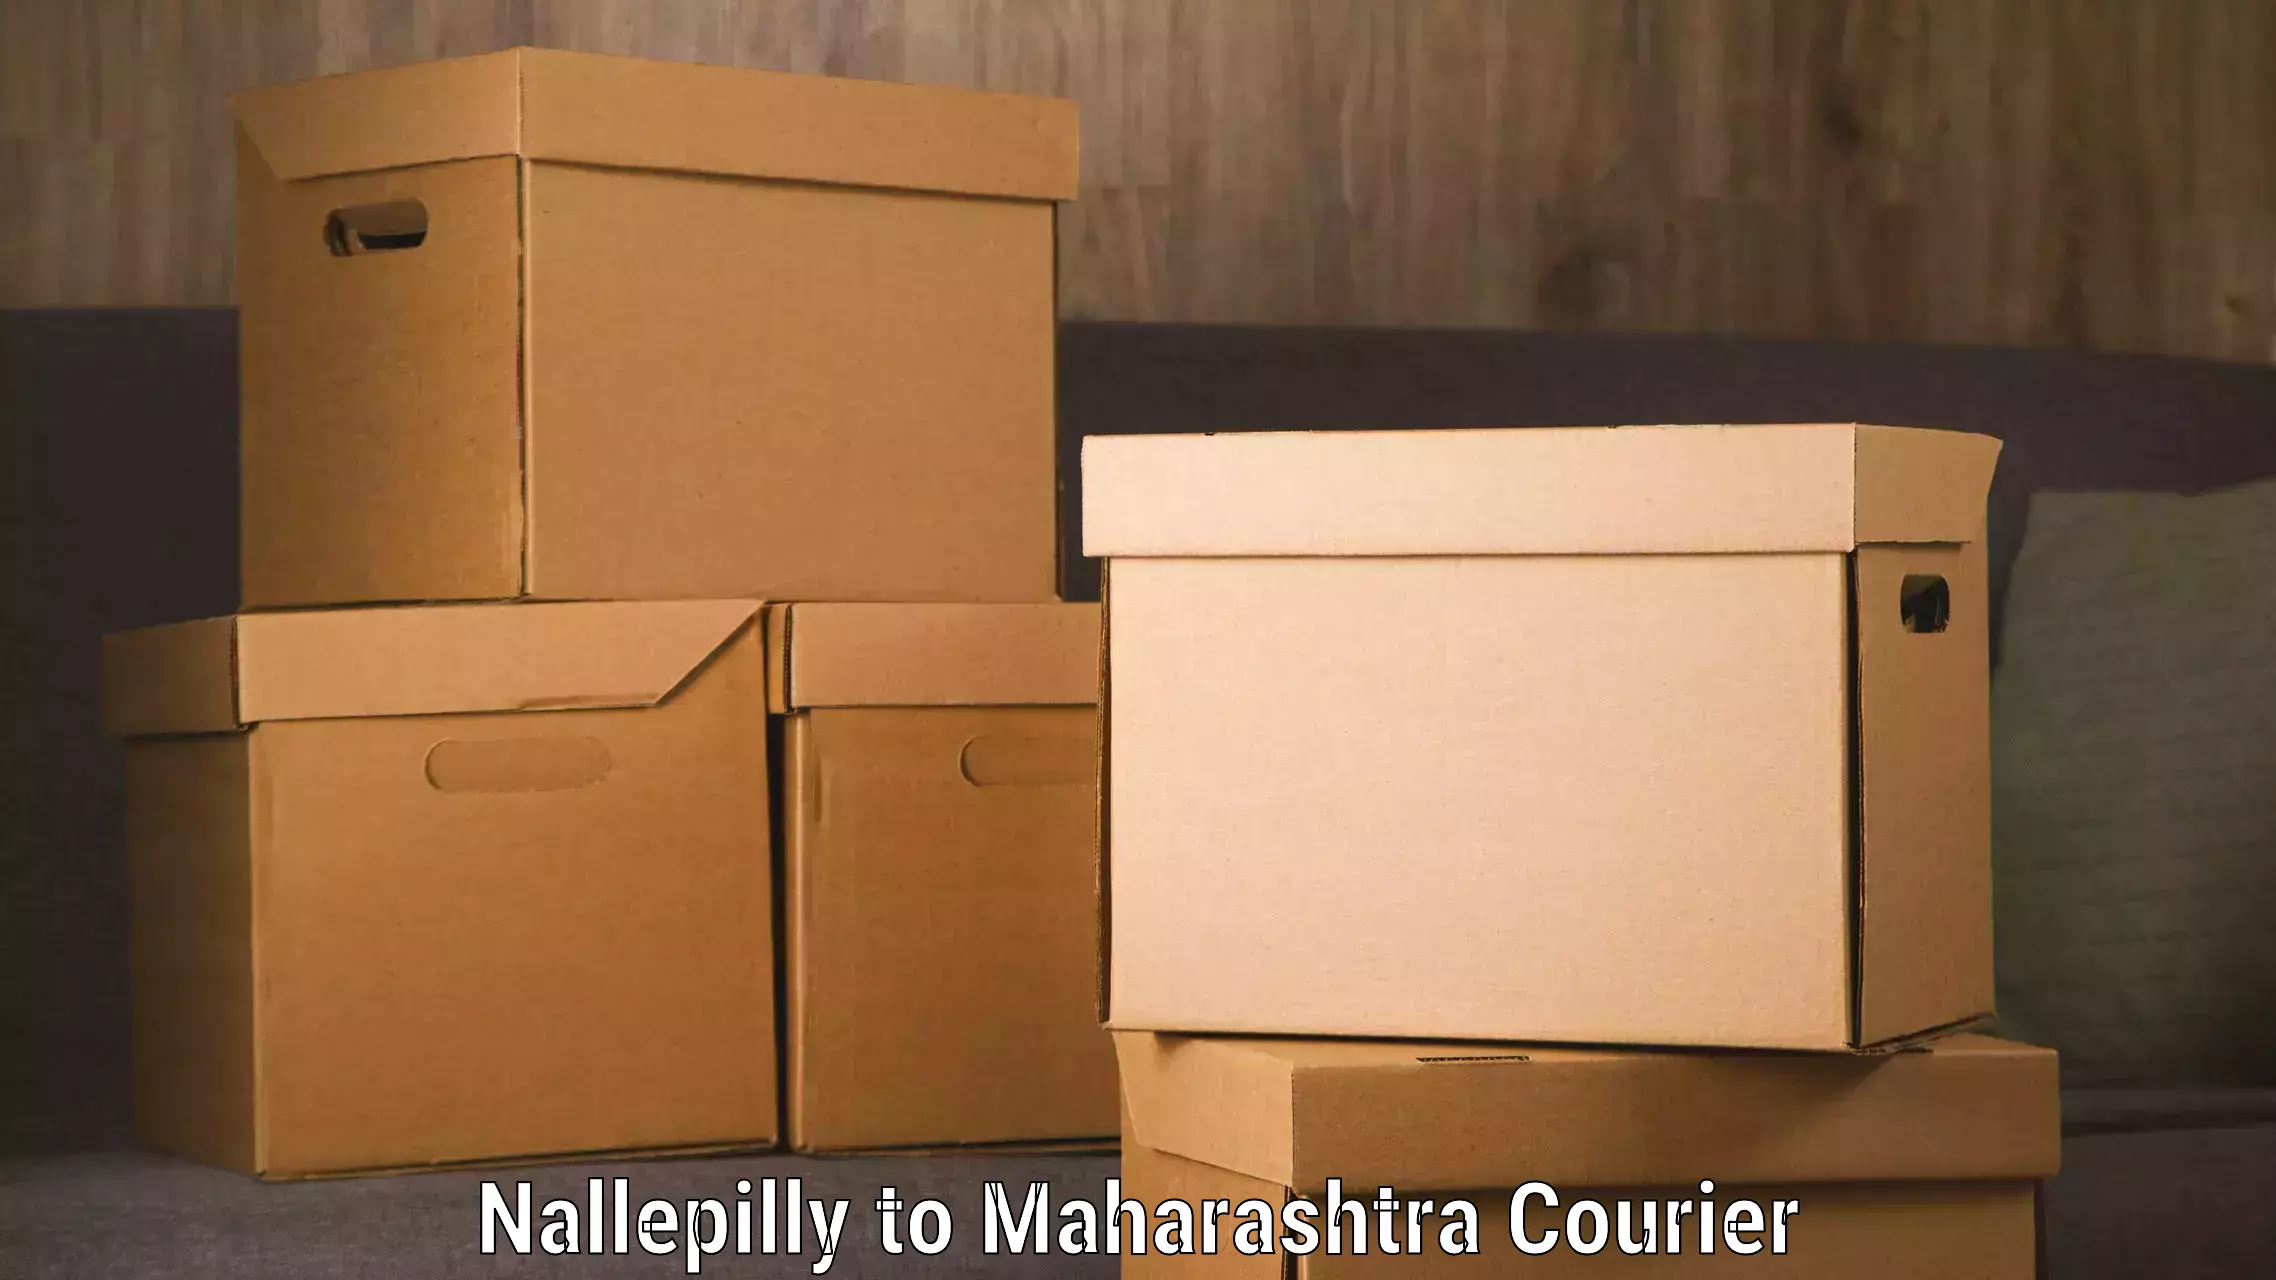 Cash on delivery service Nallepilly to Walchandnagar